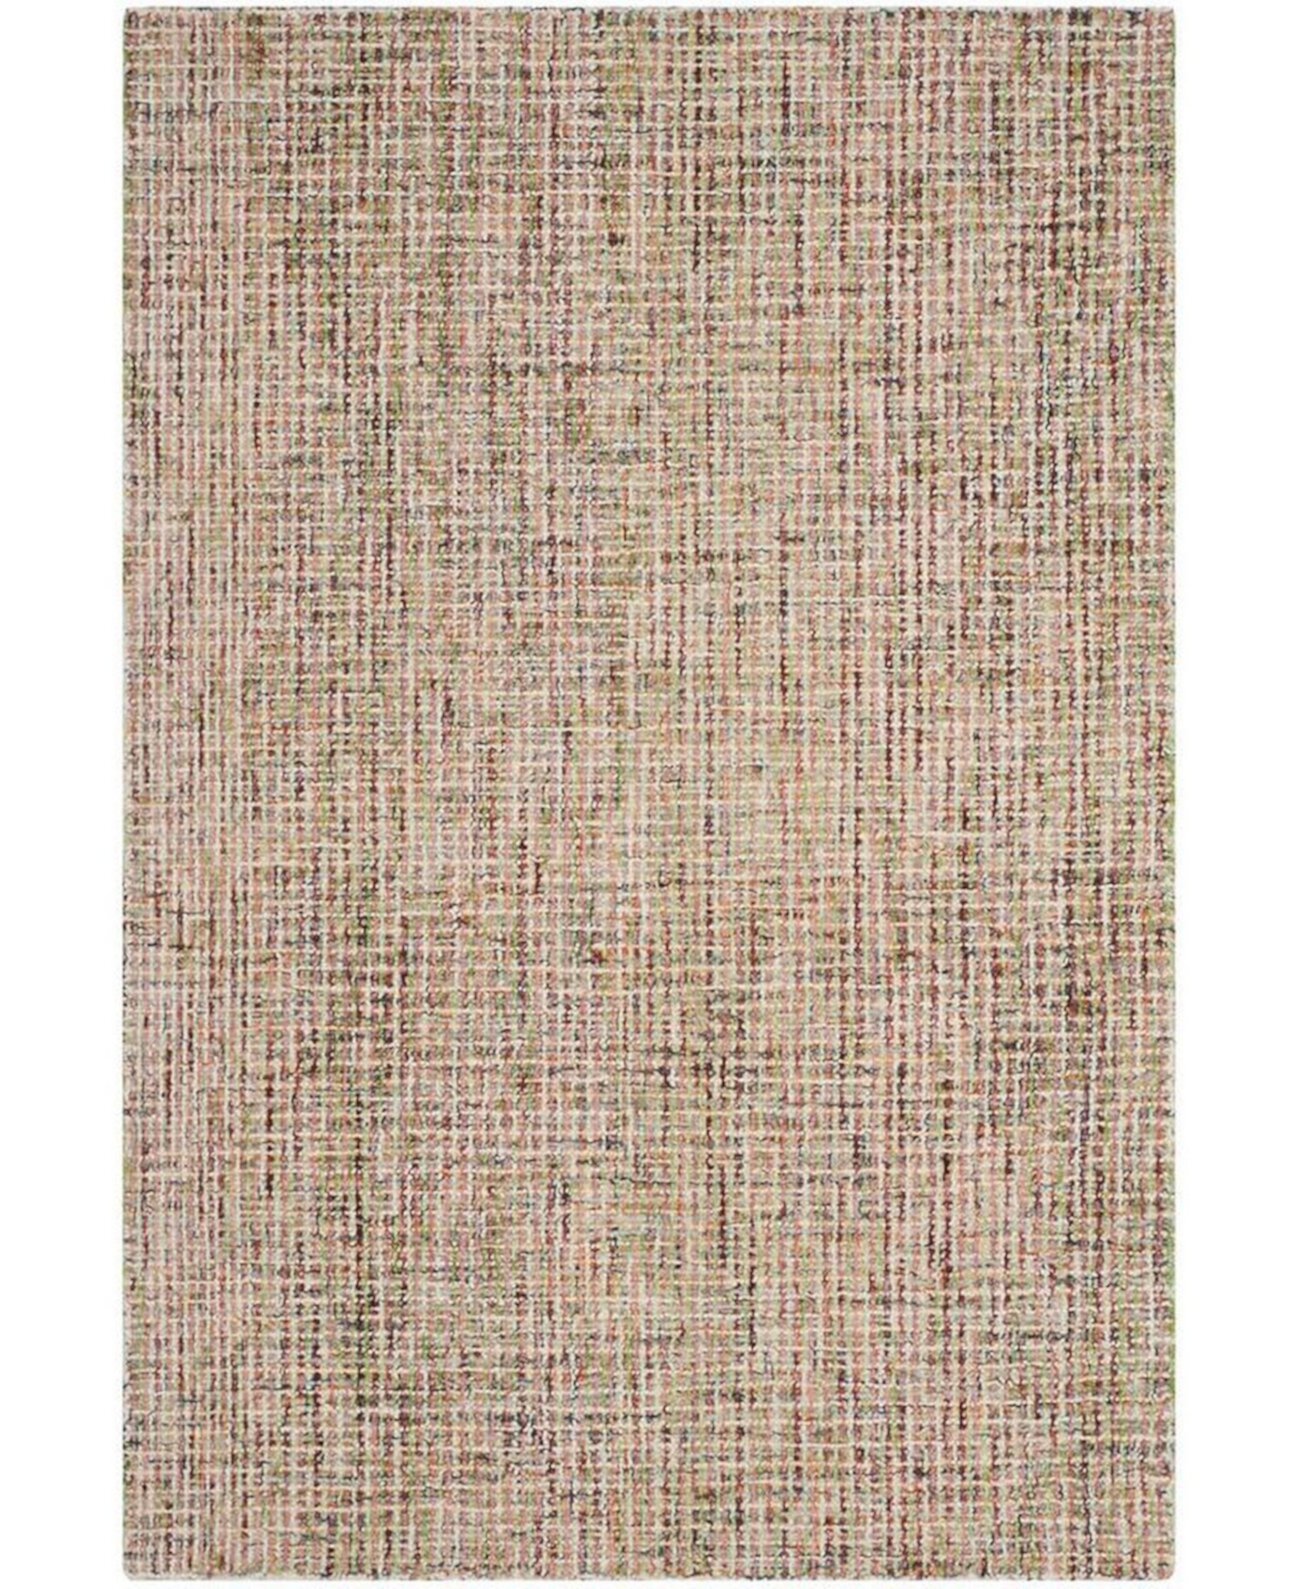 Abstract 468 Gold and Blue 6' x 9' Area Rug Safavieh